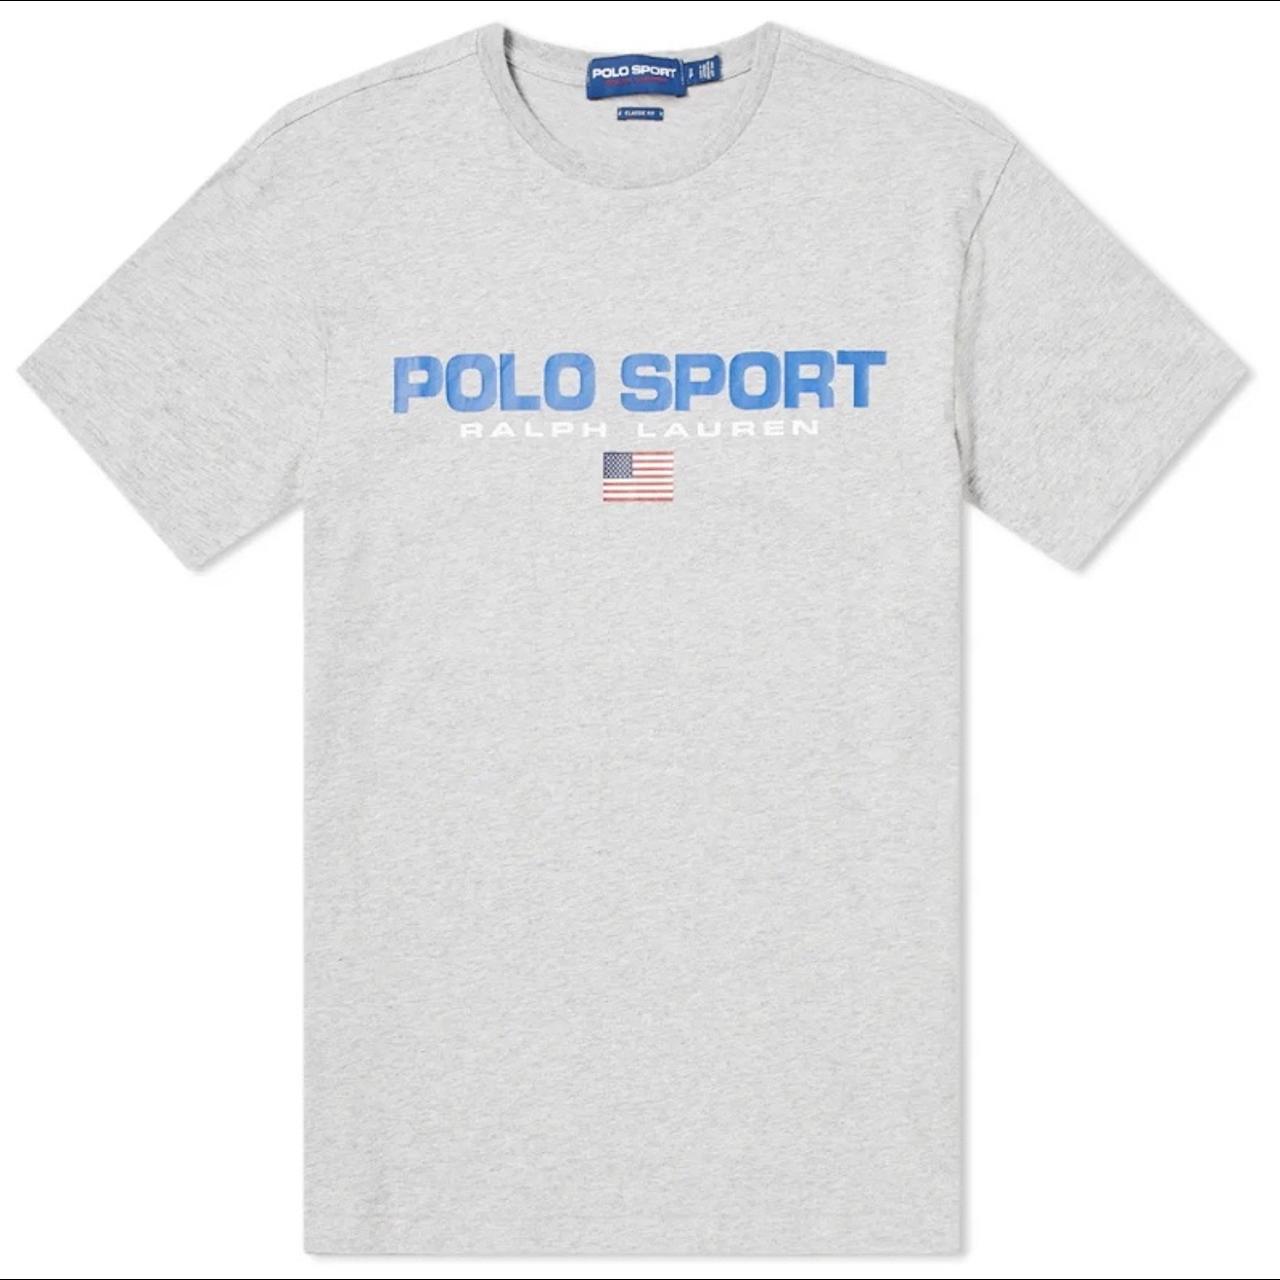 Polo Ralph Lauren Polo Sport Tee Brand new with tags... - Depop